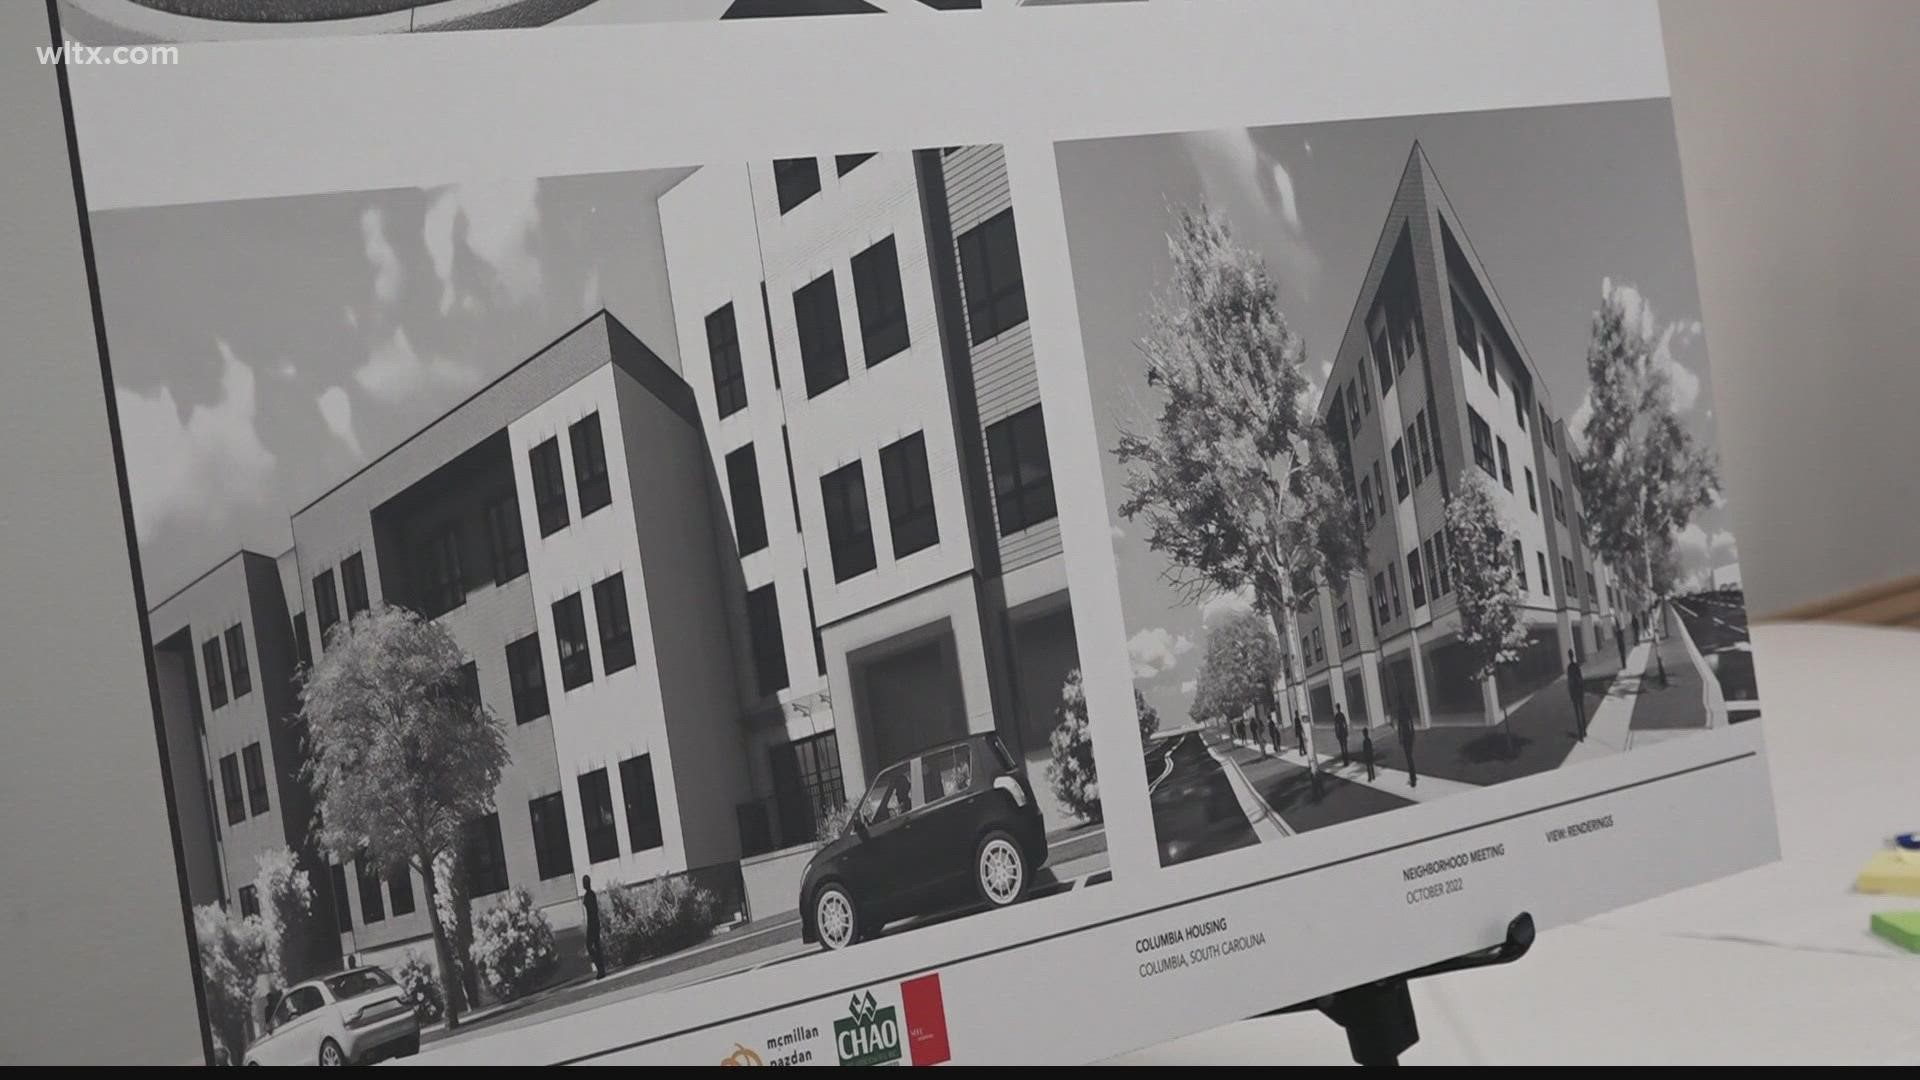 Columbia Housing on Monday unveiled plans for a new housing project at the former site of Allen-Benedict Court in Columbia.